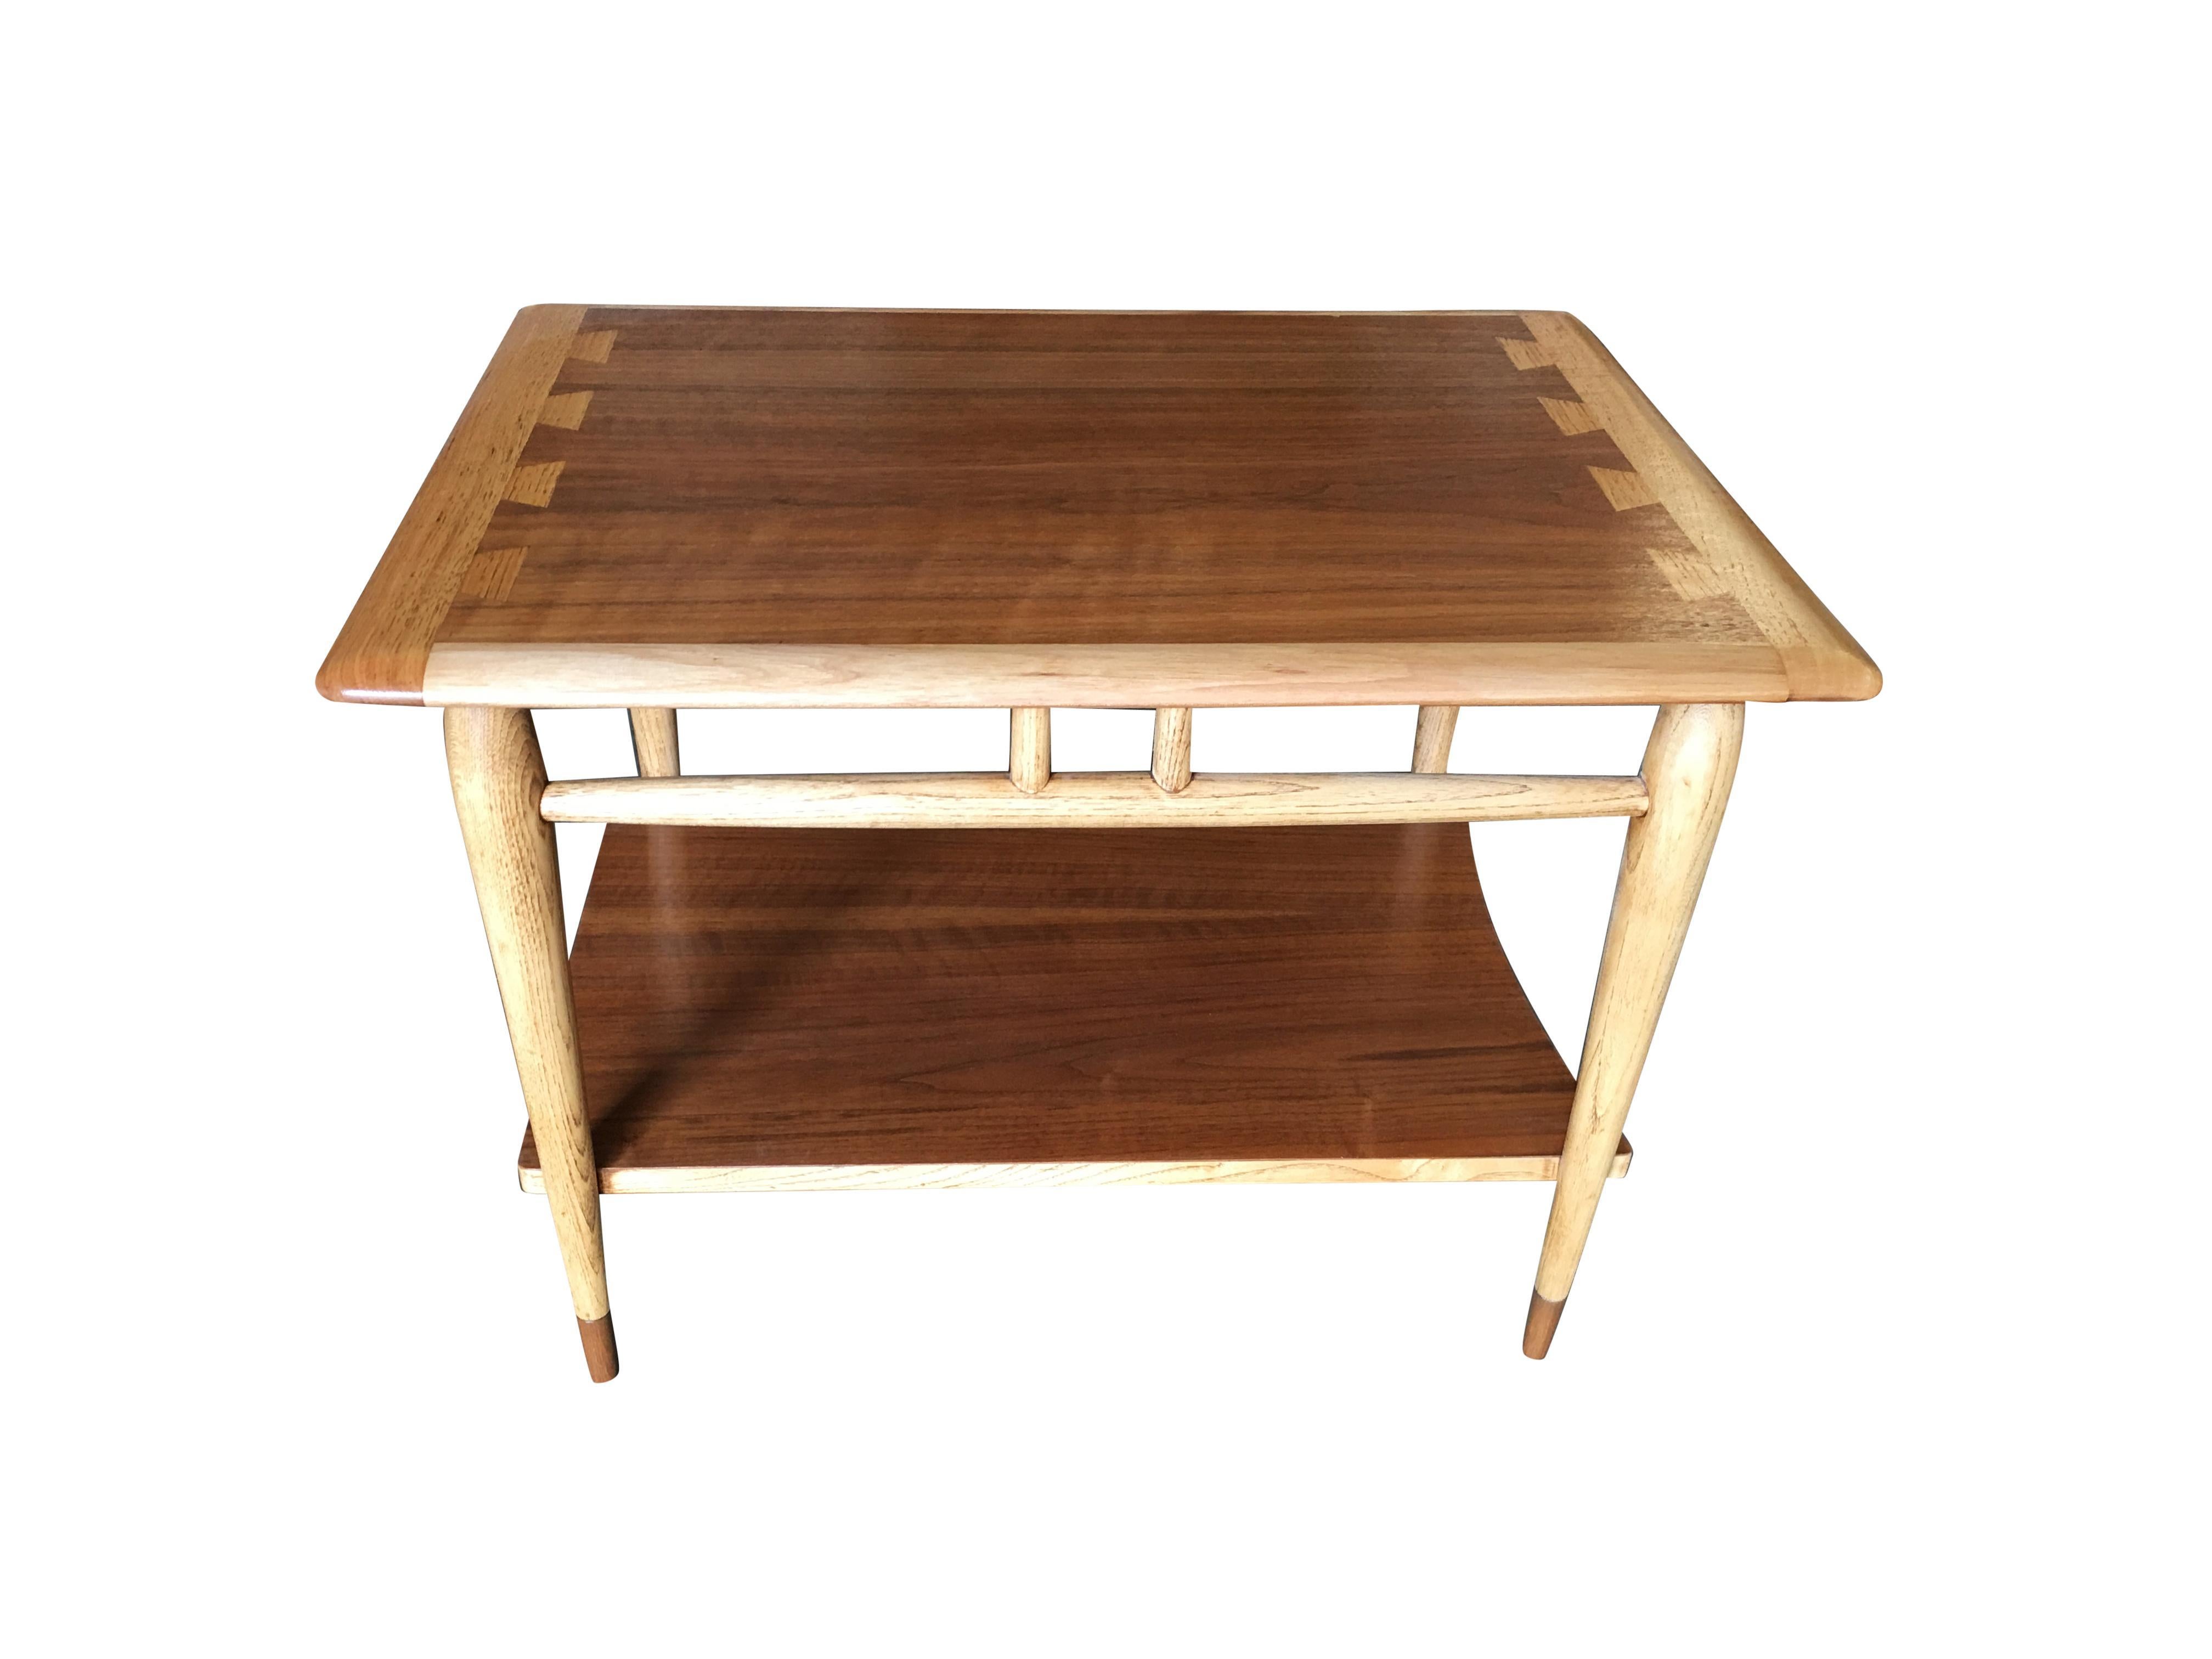 Mid-Century walnut two-tier side table with walnut and ash inlay designed by Andre Bus for Lane in 1958.